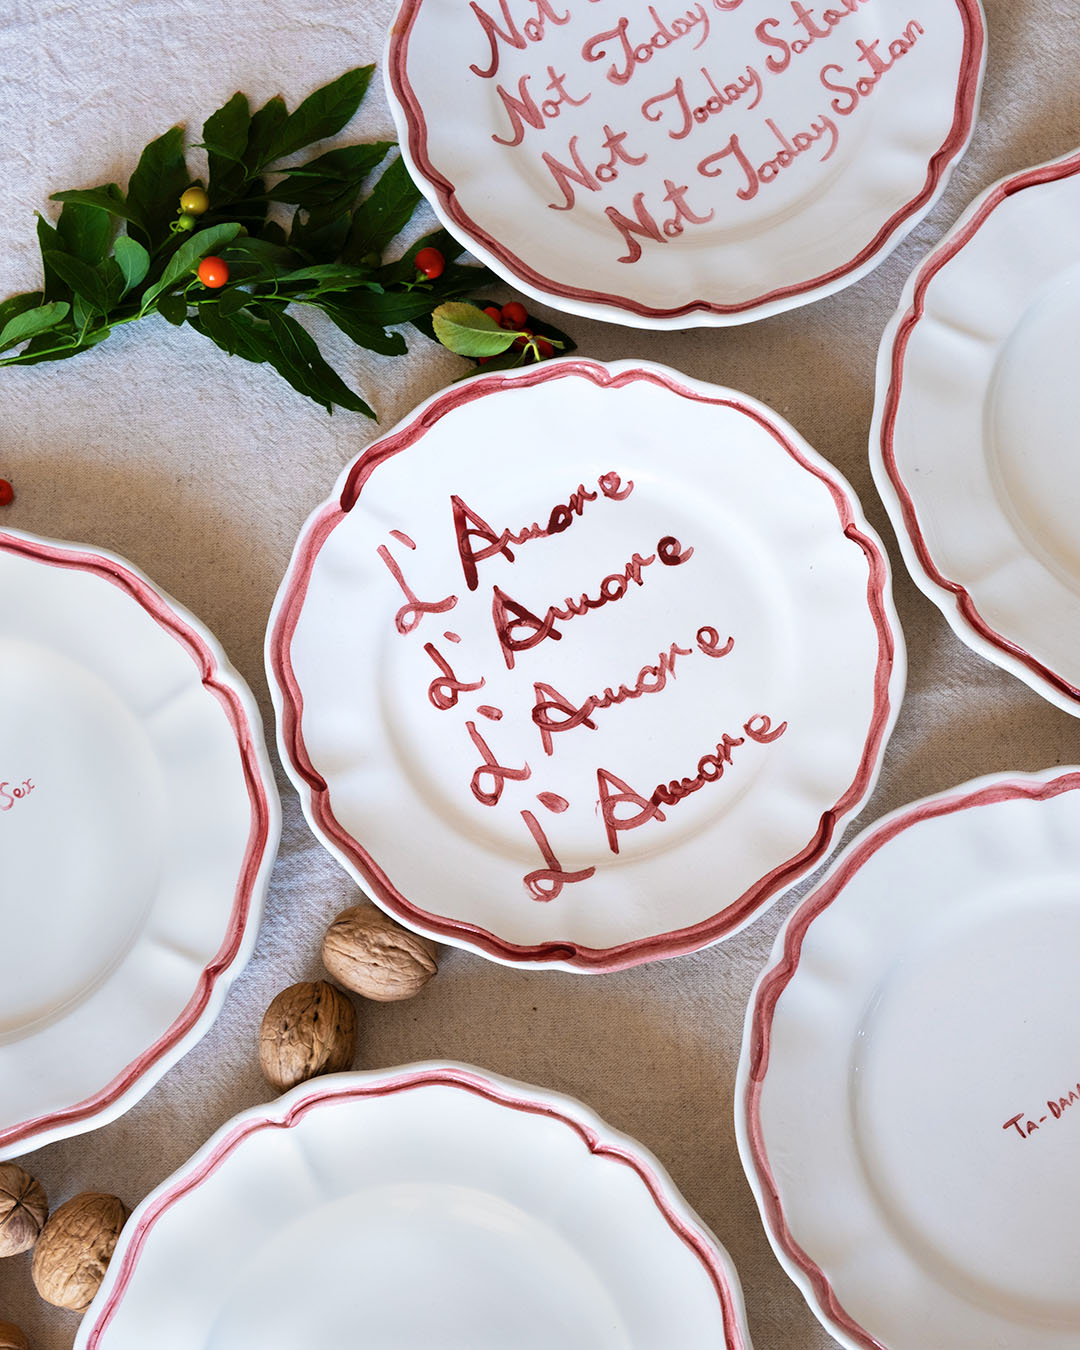 "L'amore" plate